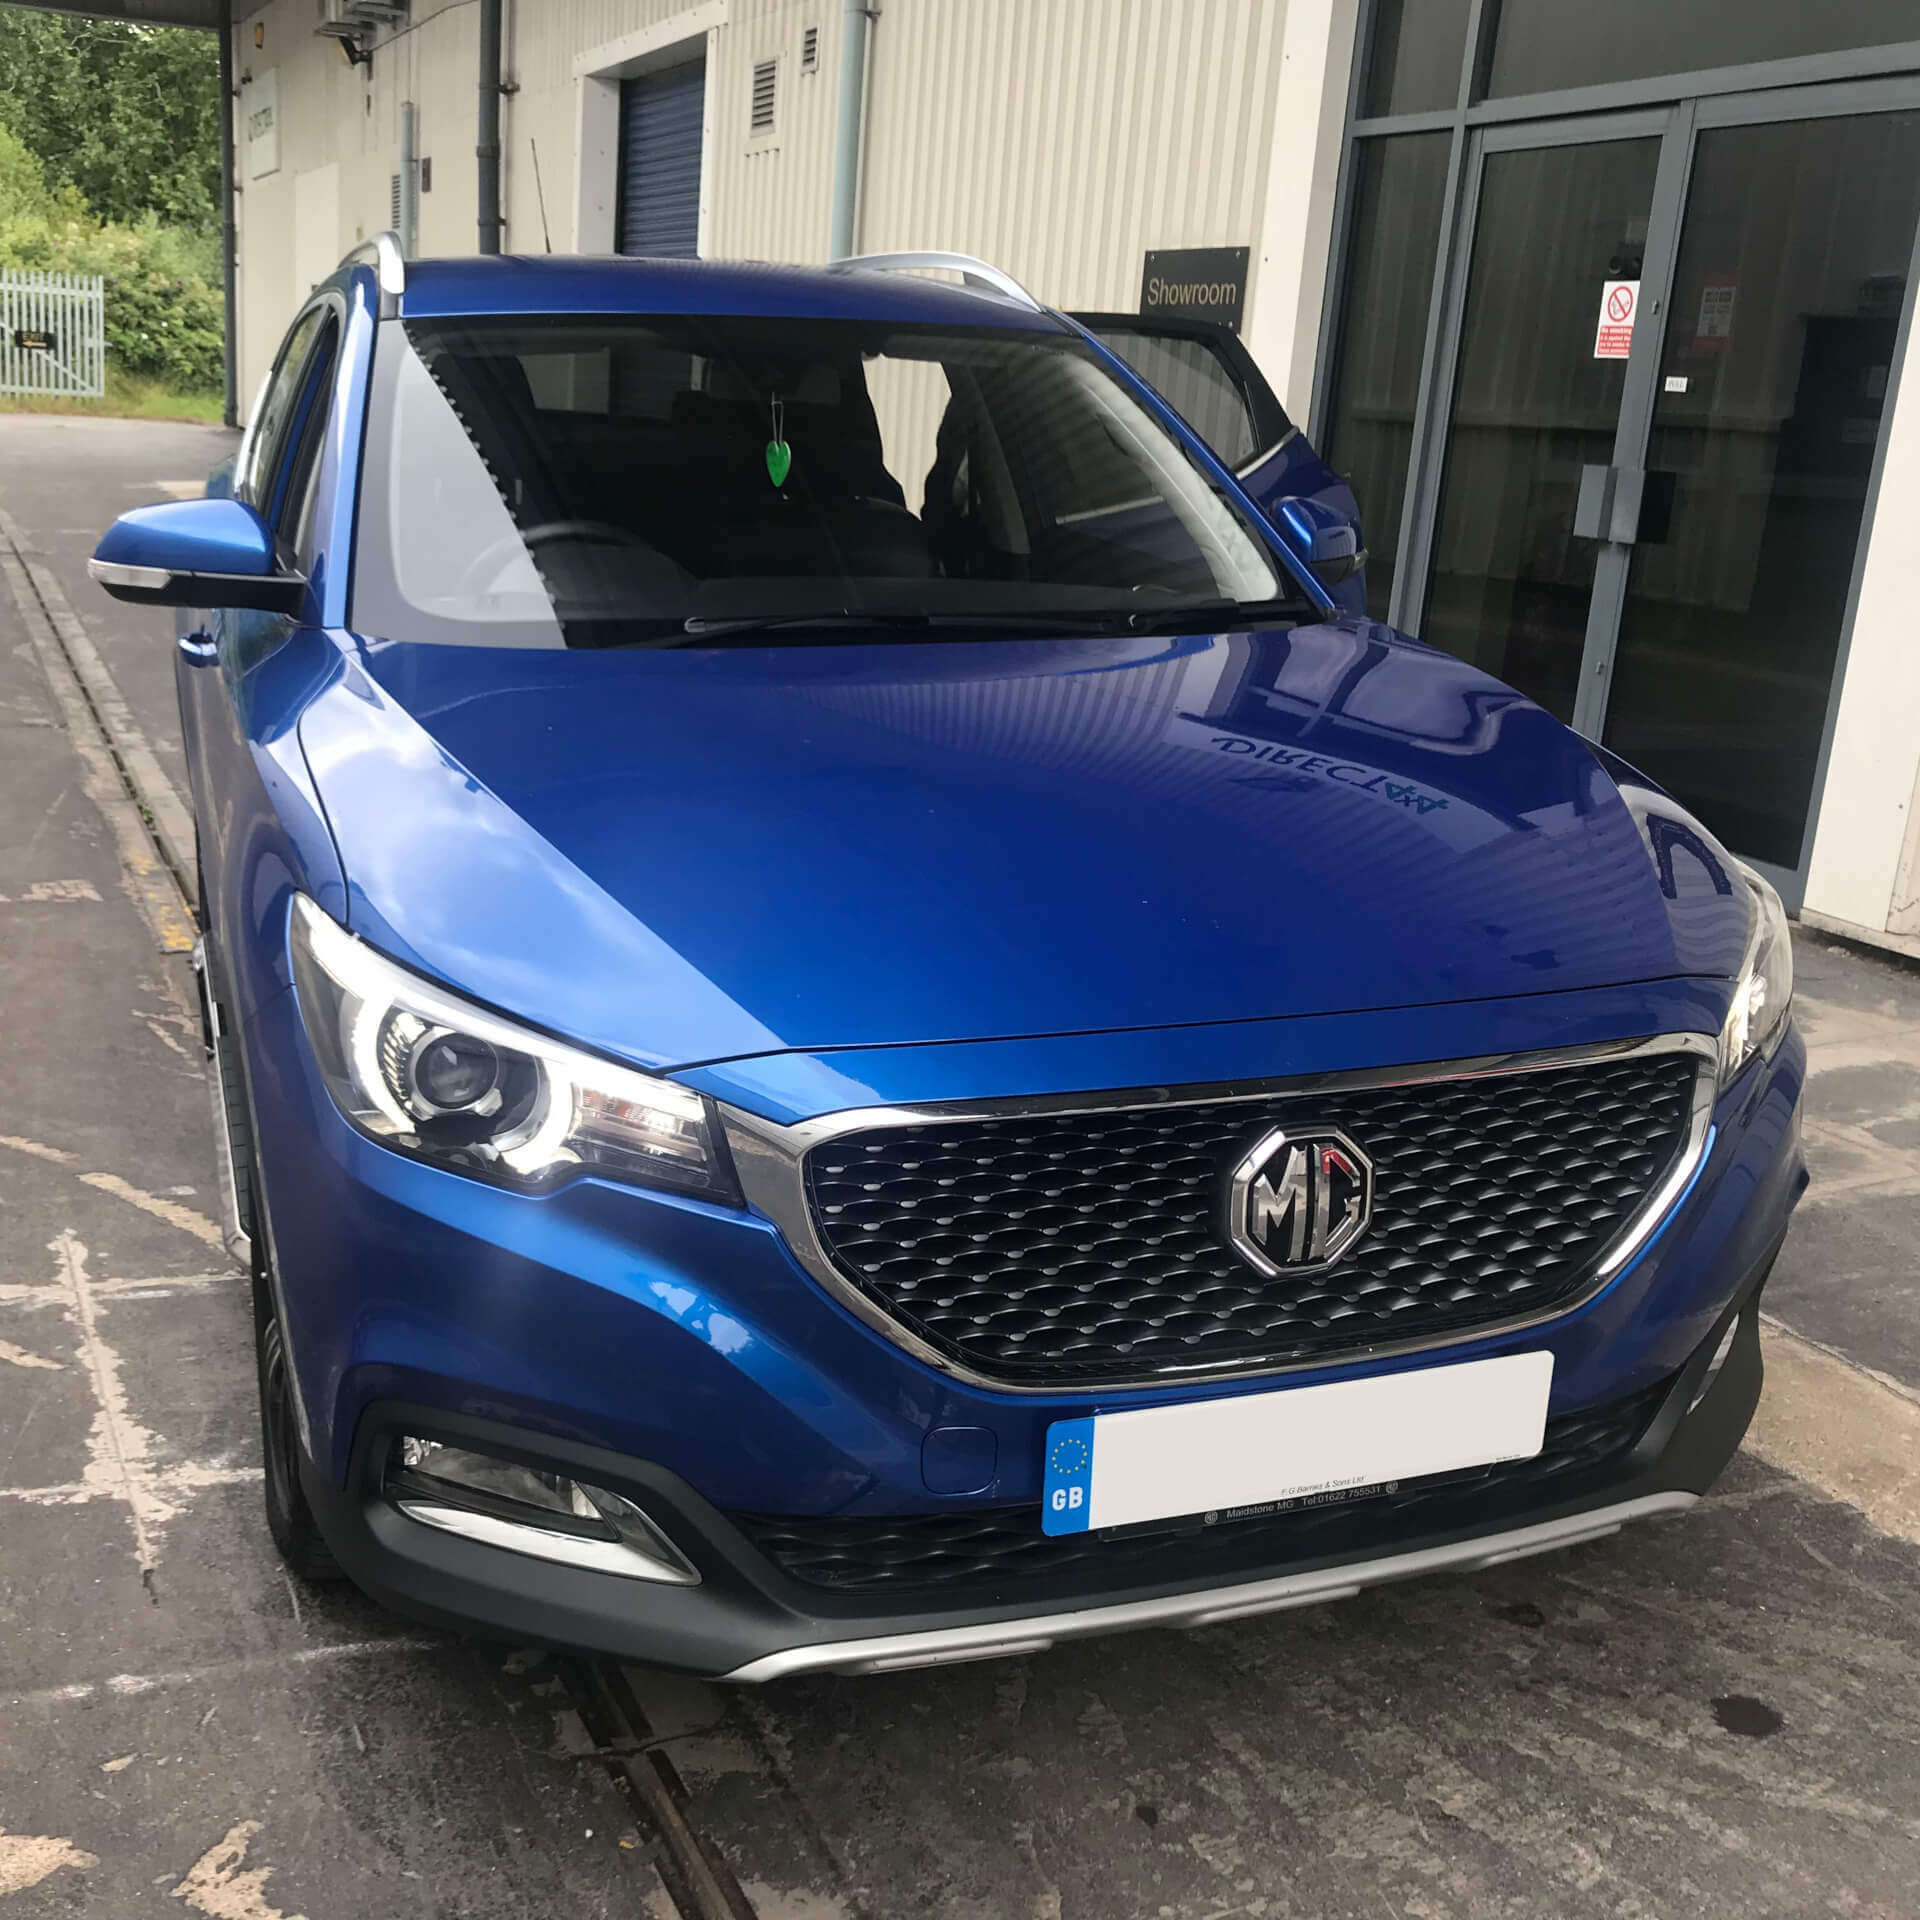 Direct4x4 accessories for MG ZS vehicles with a photo of a bright blue MG ZS parked outside our reception